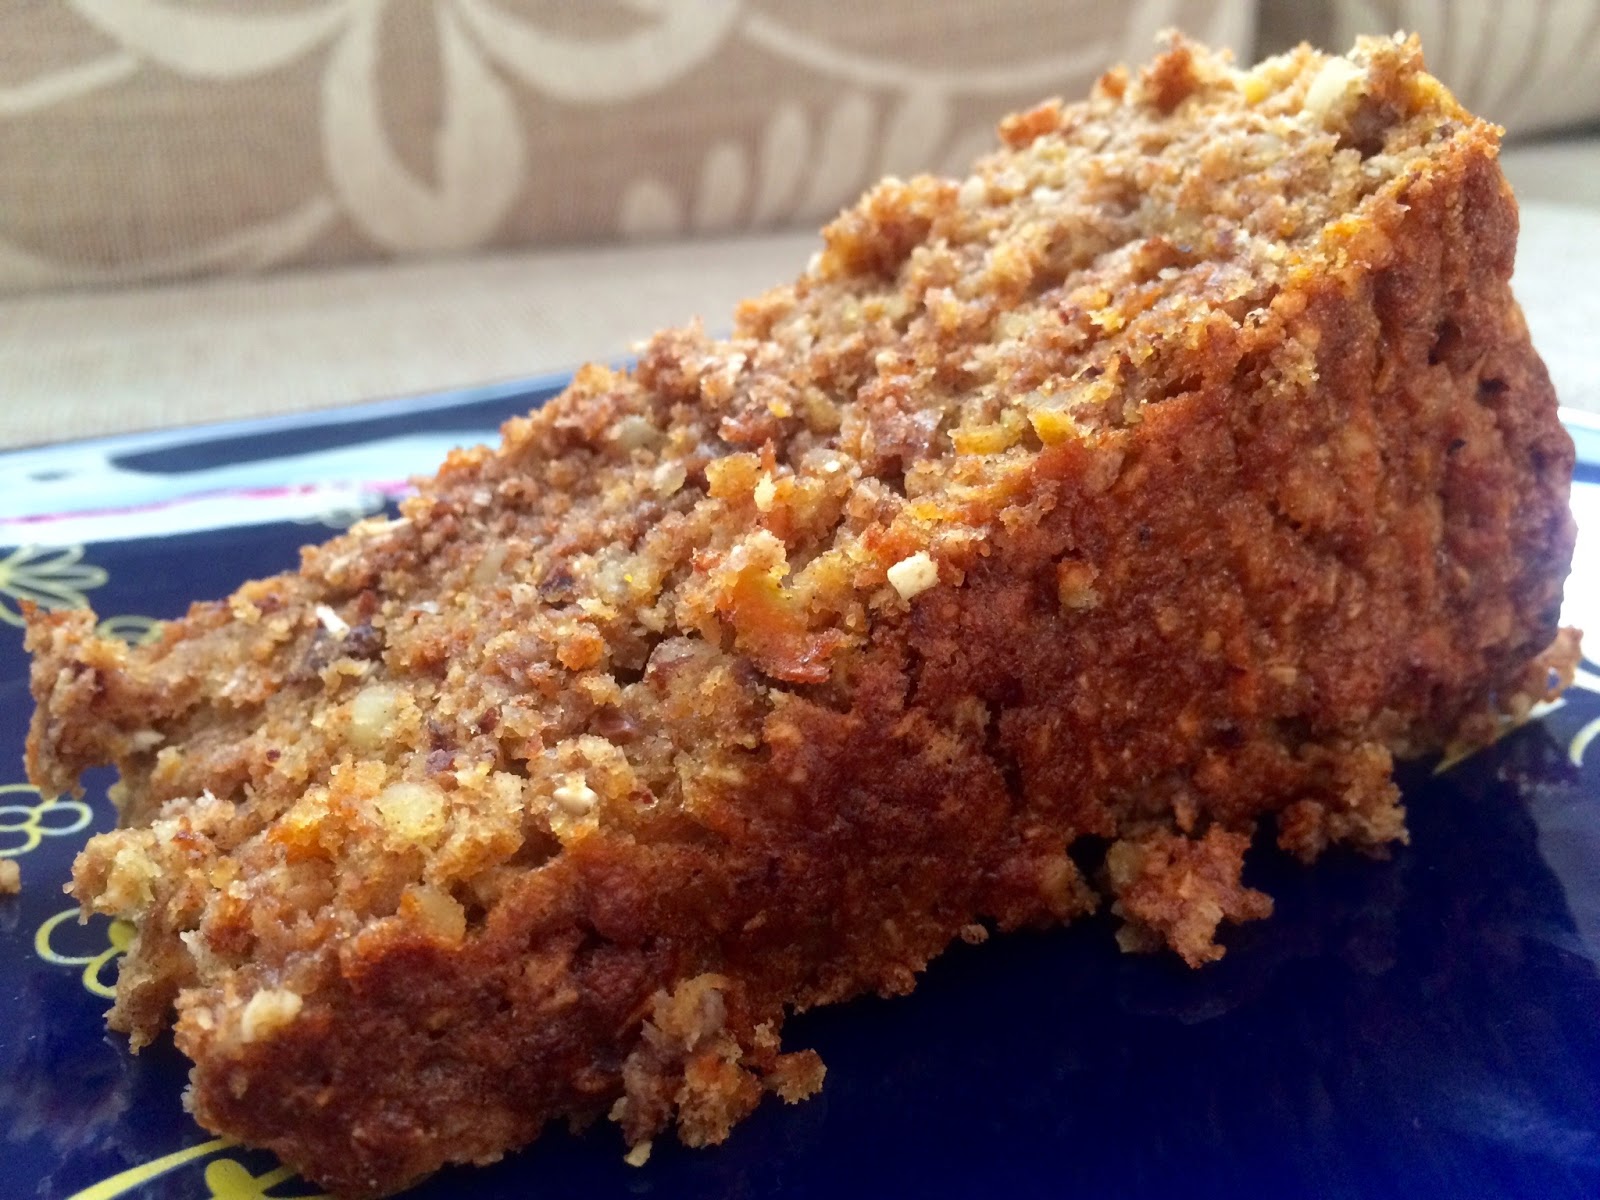 Live Within My World: Apple Carrot Cake * RECIPE